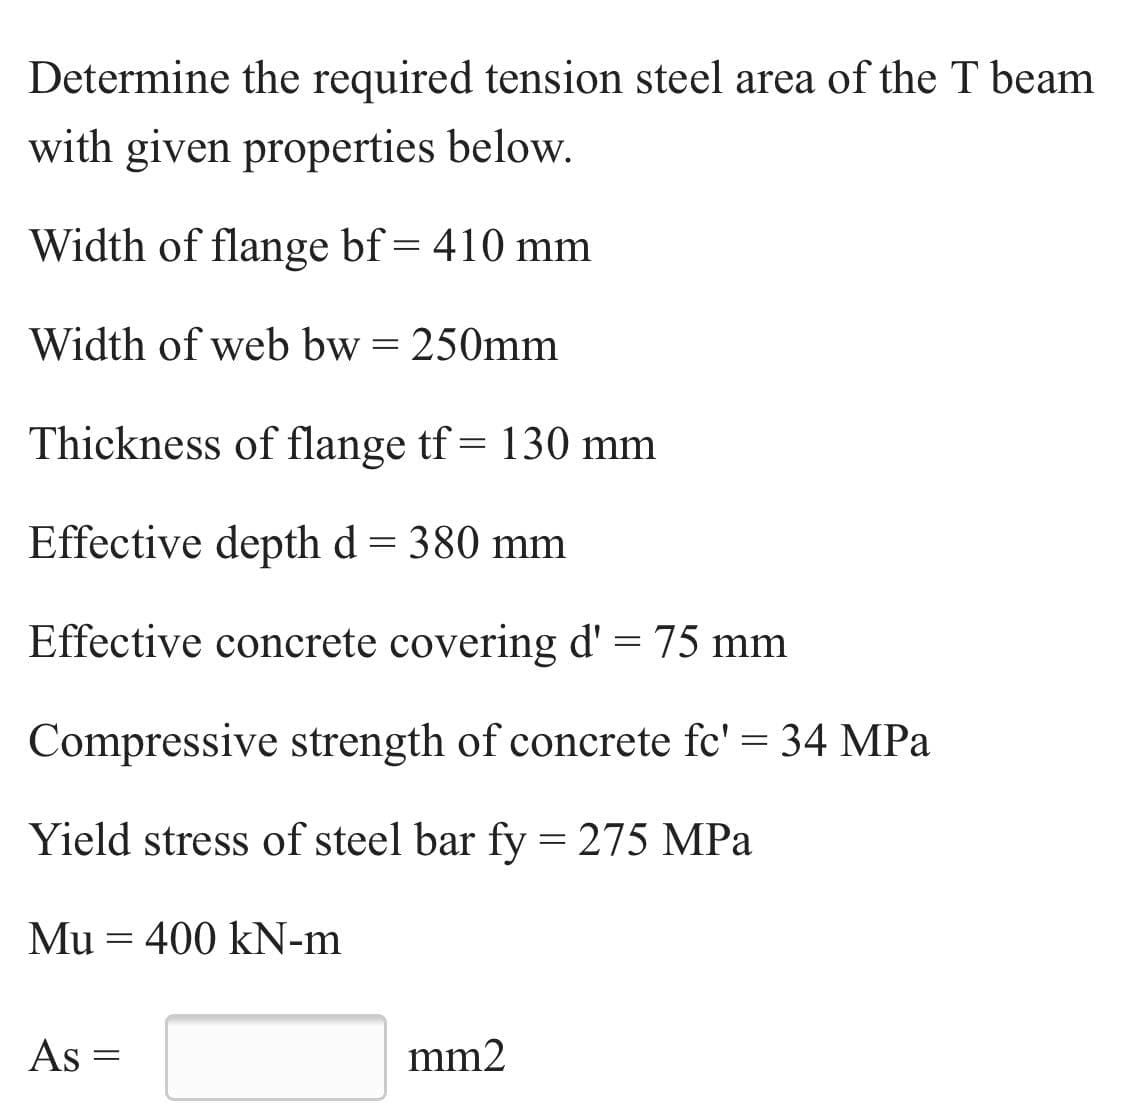 Determine the required tension steel area of the T beam
with given properties below.
Width of flange bf= 410 mm
Width of web bw = 250mm
Thickness of flange tf = 130 mm
Effective depth d = 380 mm
Effective concrete covering d' = 75 mm
Compressive strength of concrete fc' = 34 MPa
Yield stress of steel bar fy = 275 MPa
Mu = 400 kN-m
As
mm2
